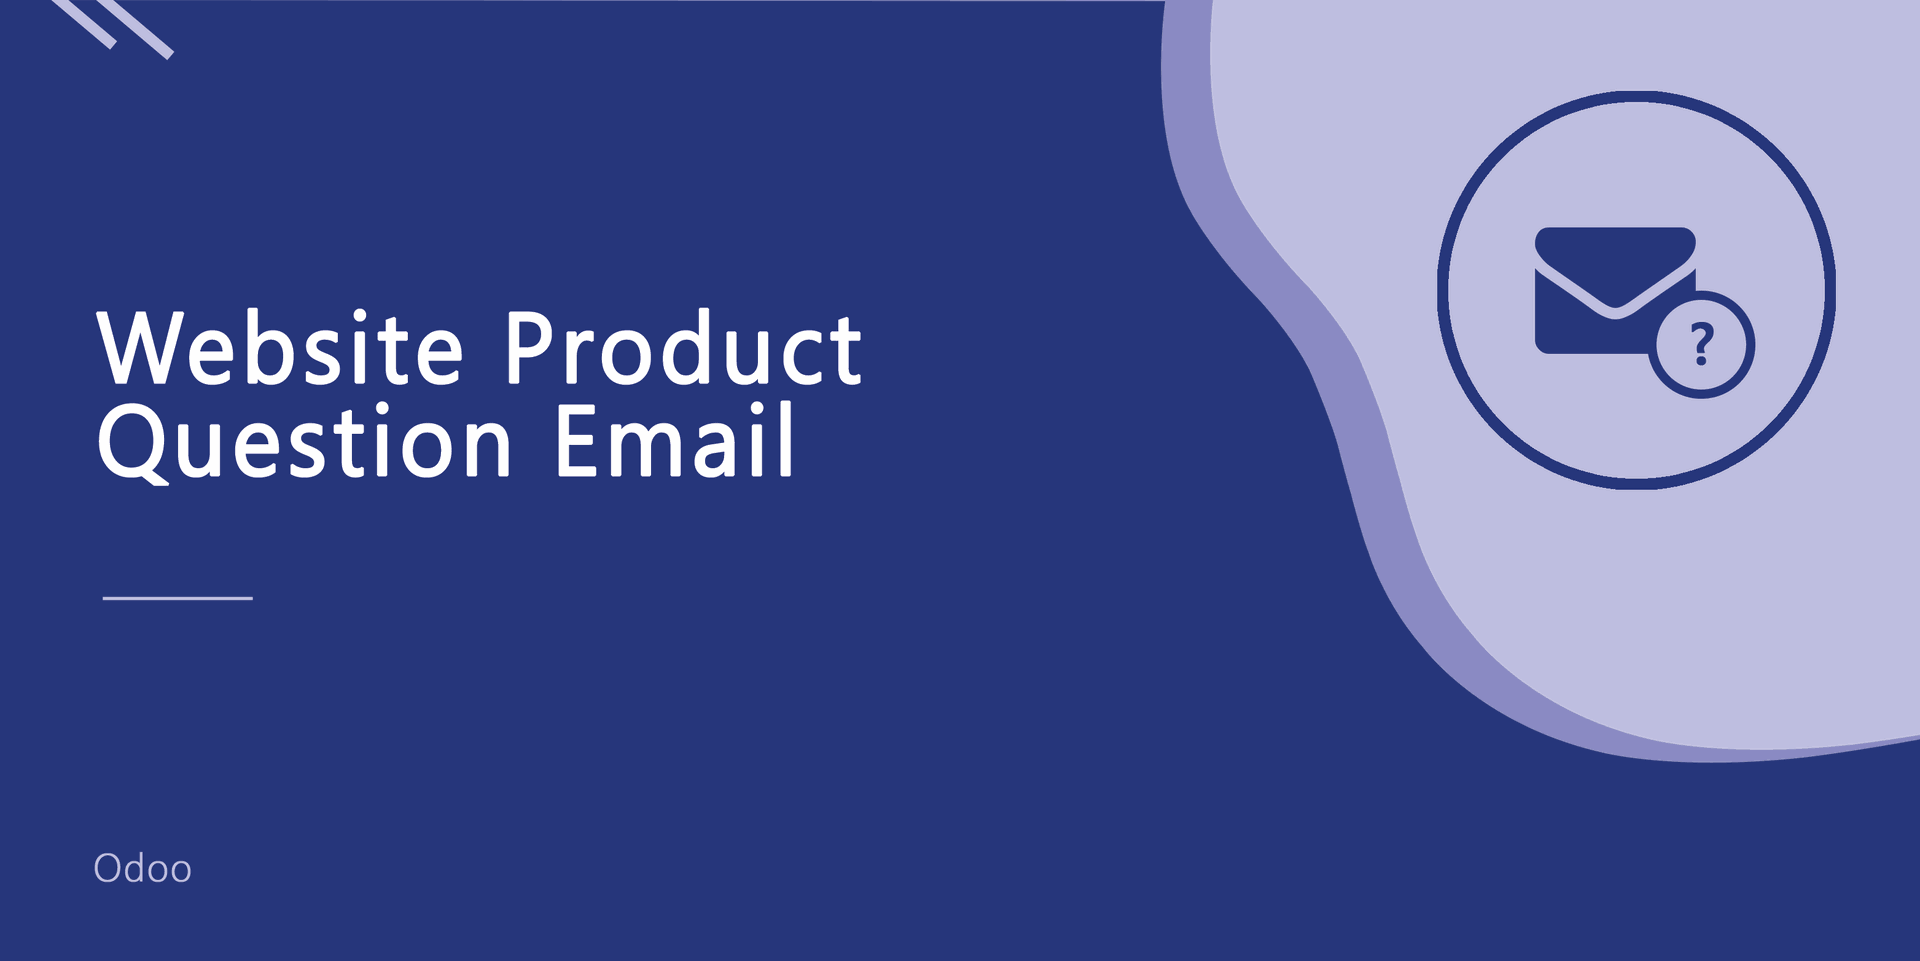 Website Product Question Email

